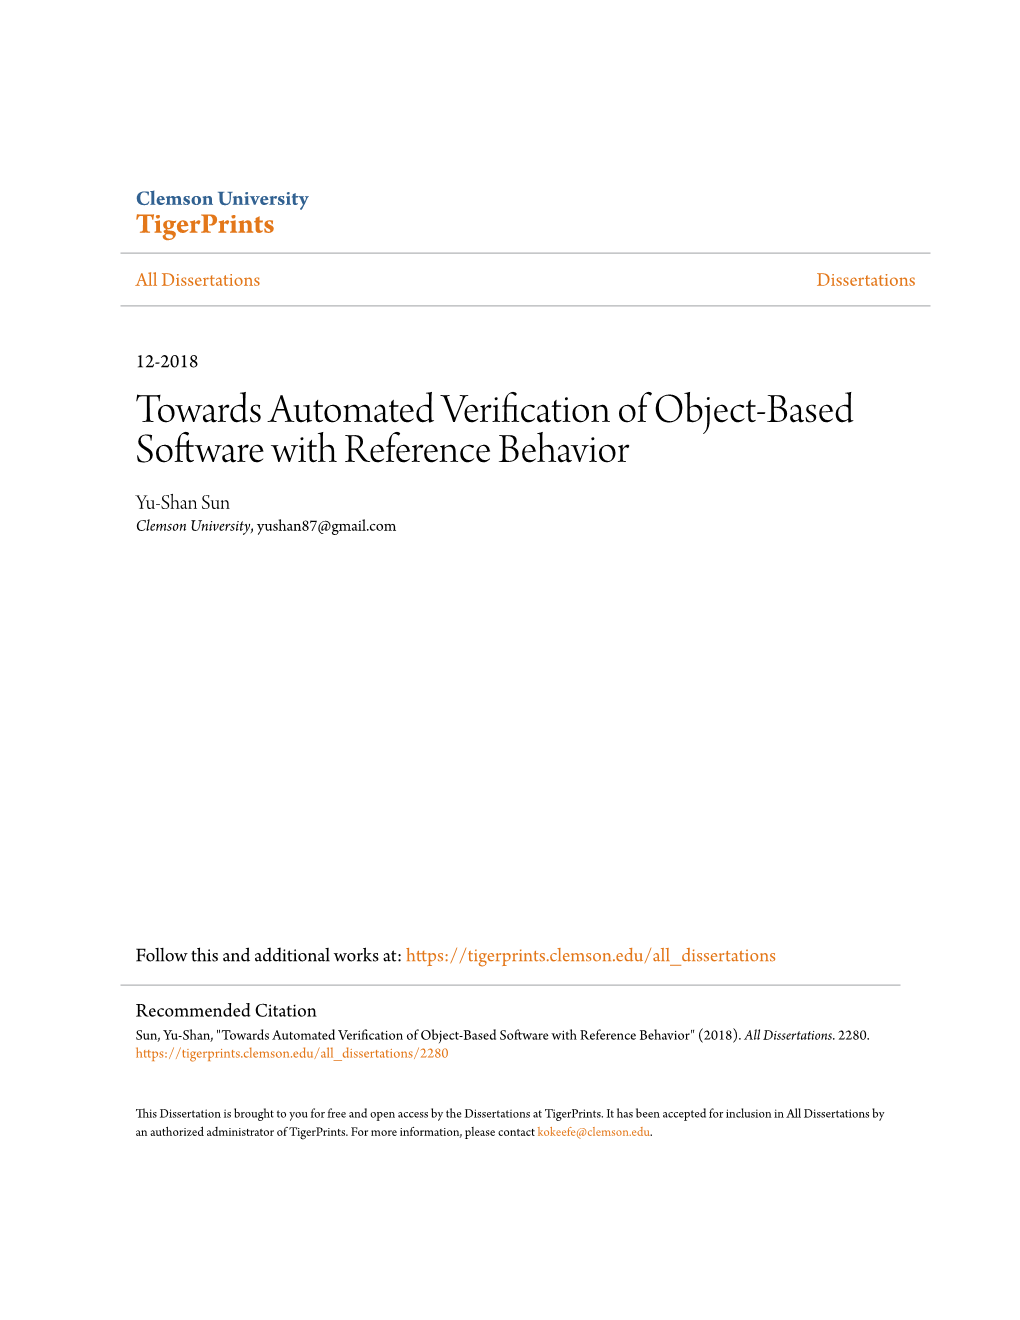 Towards Automated Verification of Object-Based Software with Reference Behavior Yu-Shan Sun Clemson University, Yushan87@Gmail.Com